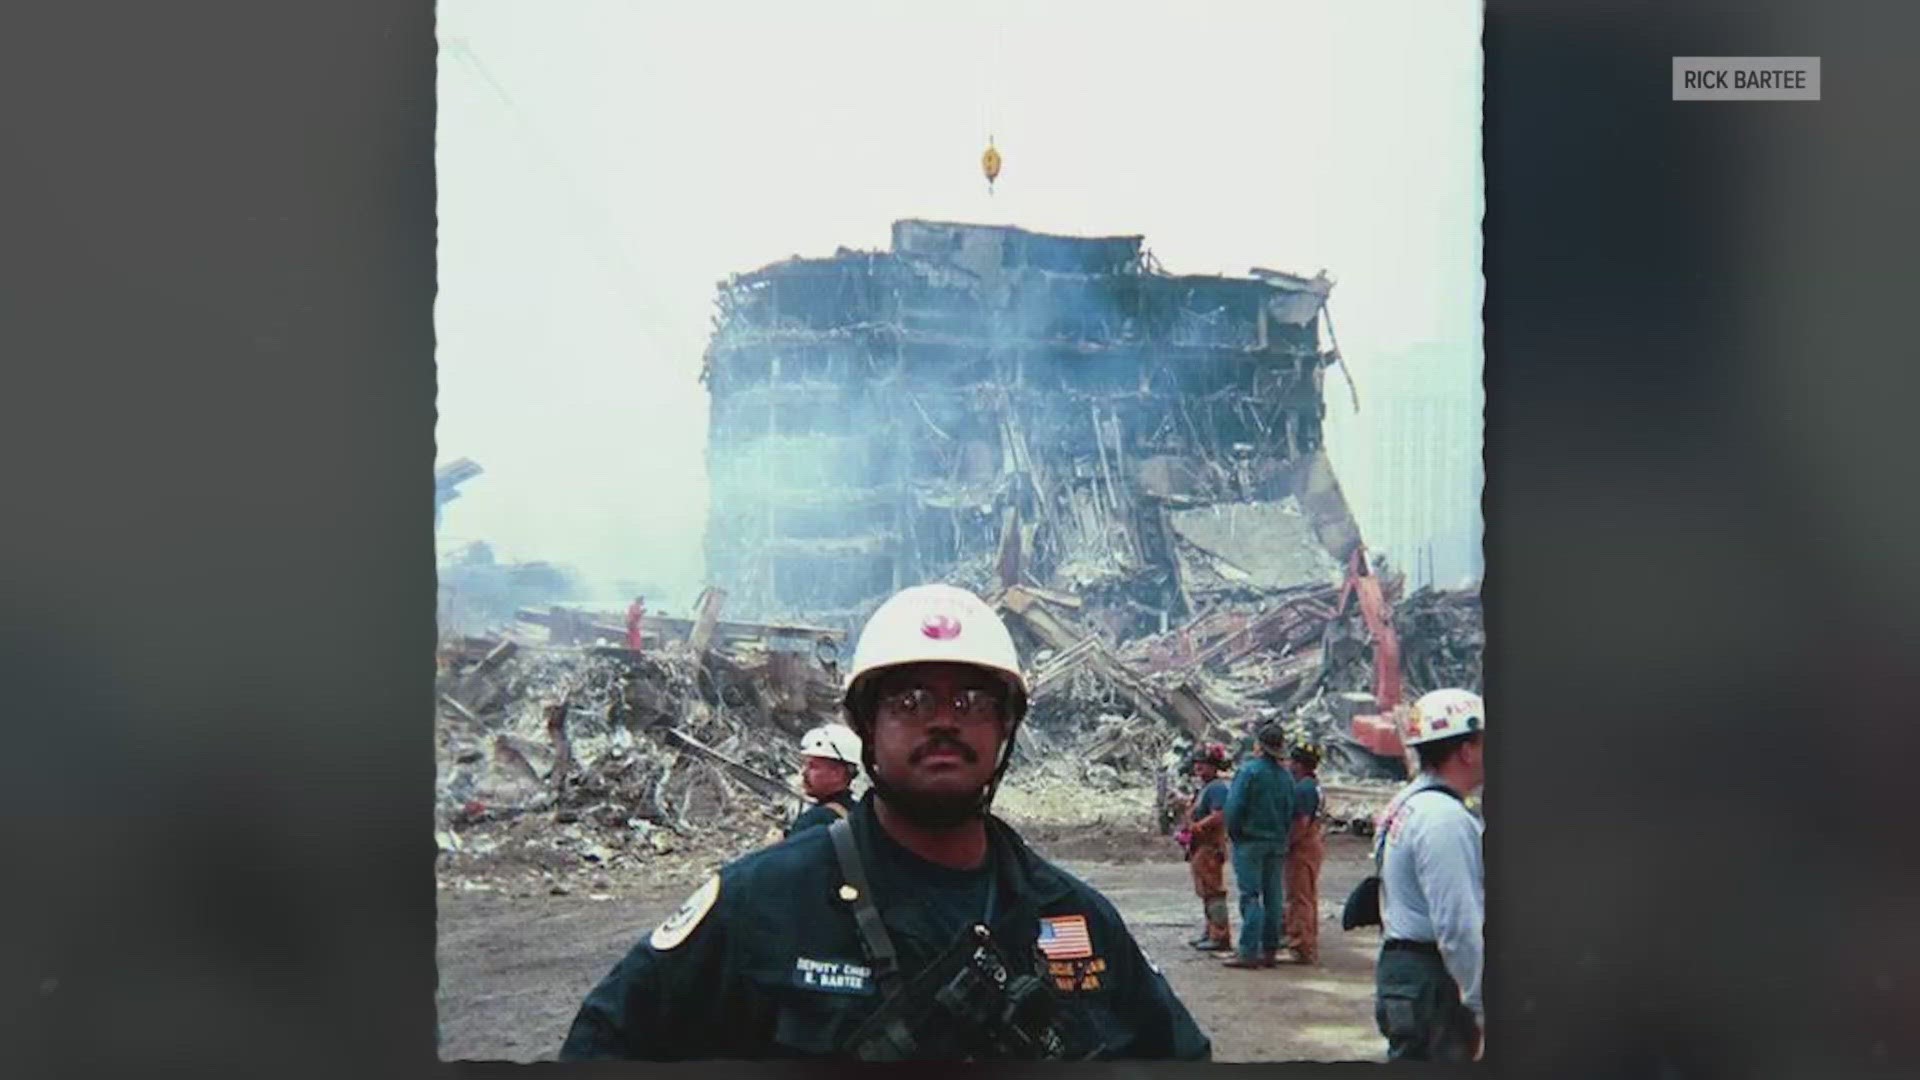 Roseville Fire Chief Rick Bartee will never forget the day he stepped foot on Ground Zero